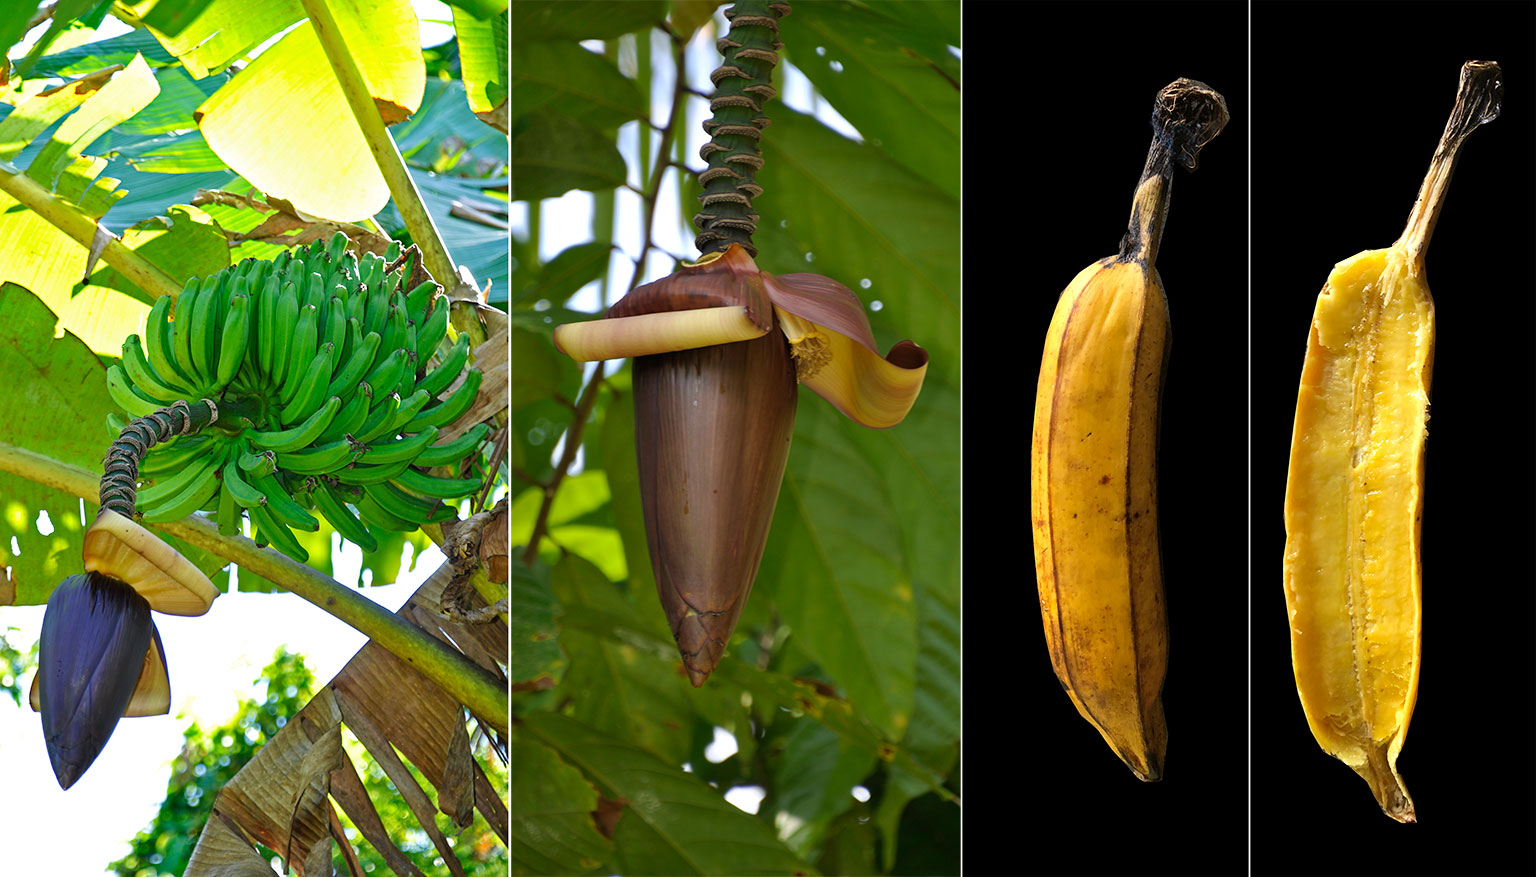 Where banana diversity defies expectations : News and analysis ...